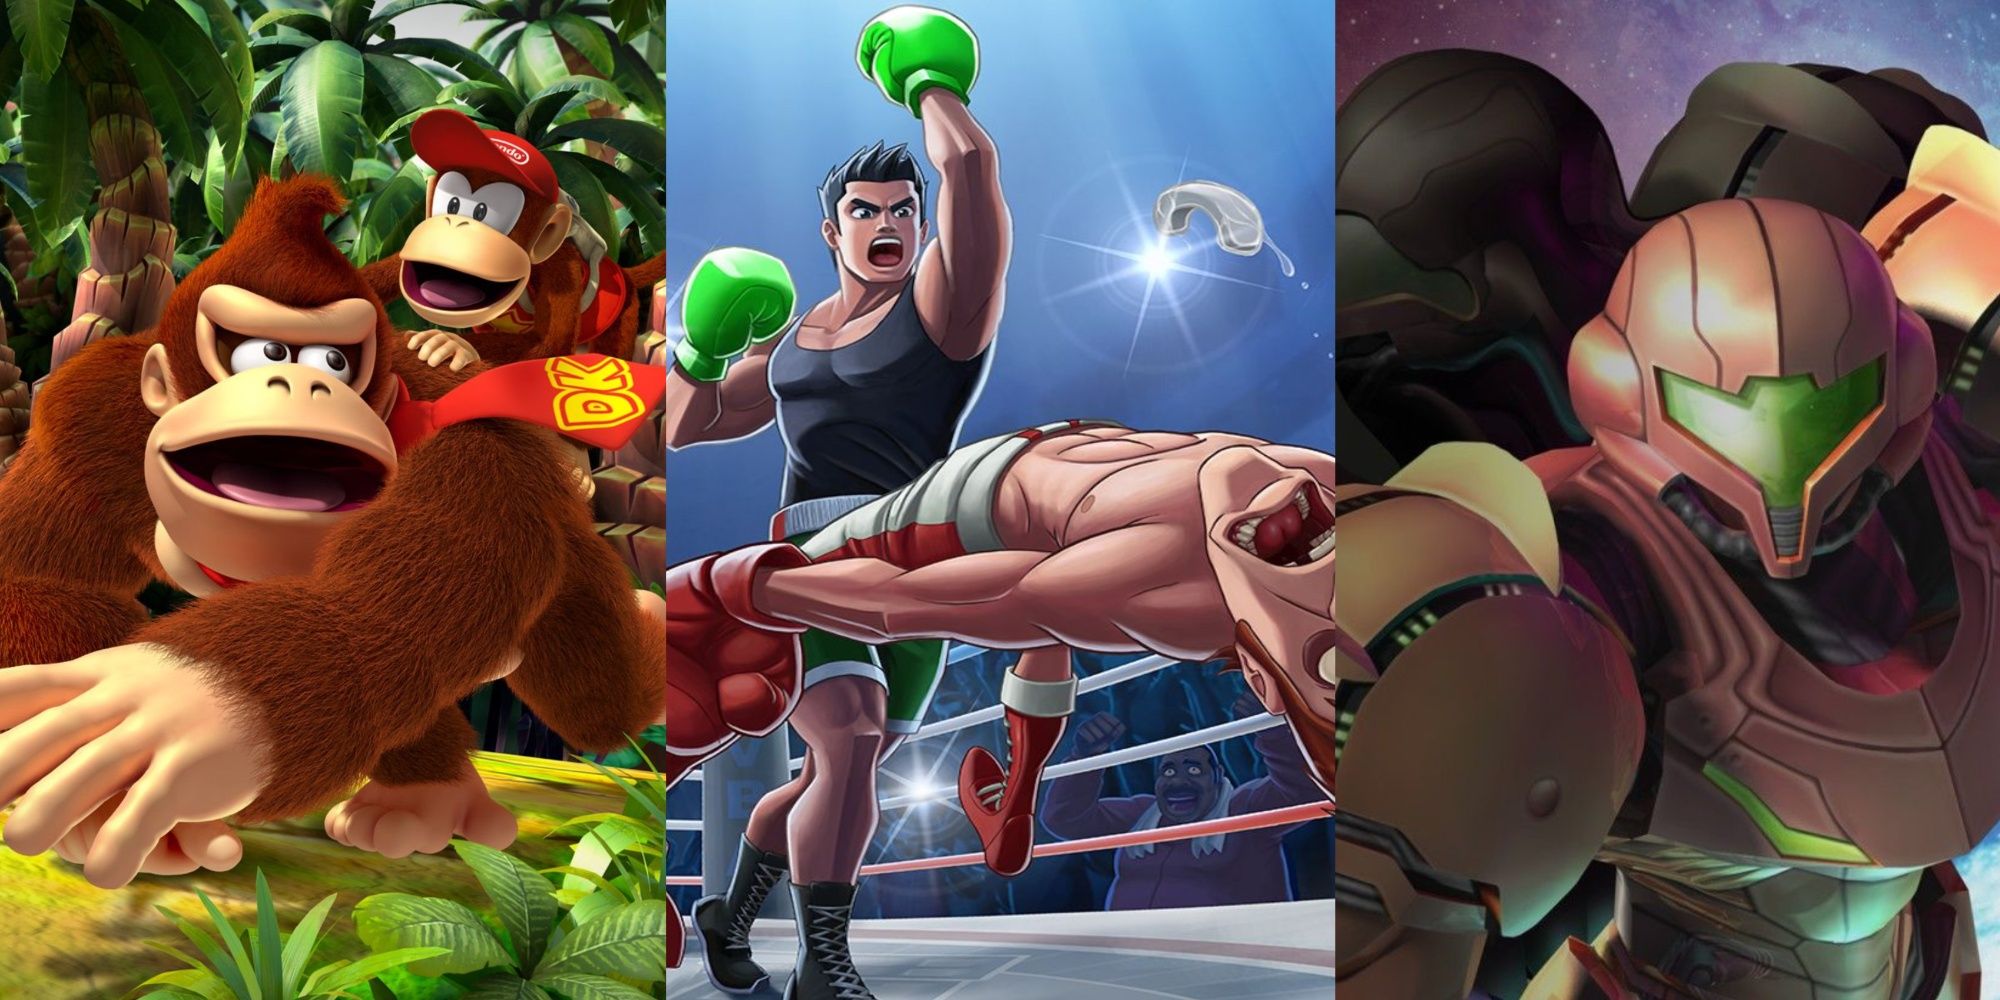 Box art to Donkey Kong Country Returns and Metroid Prime 3, plus key art for Punch Out Wii.